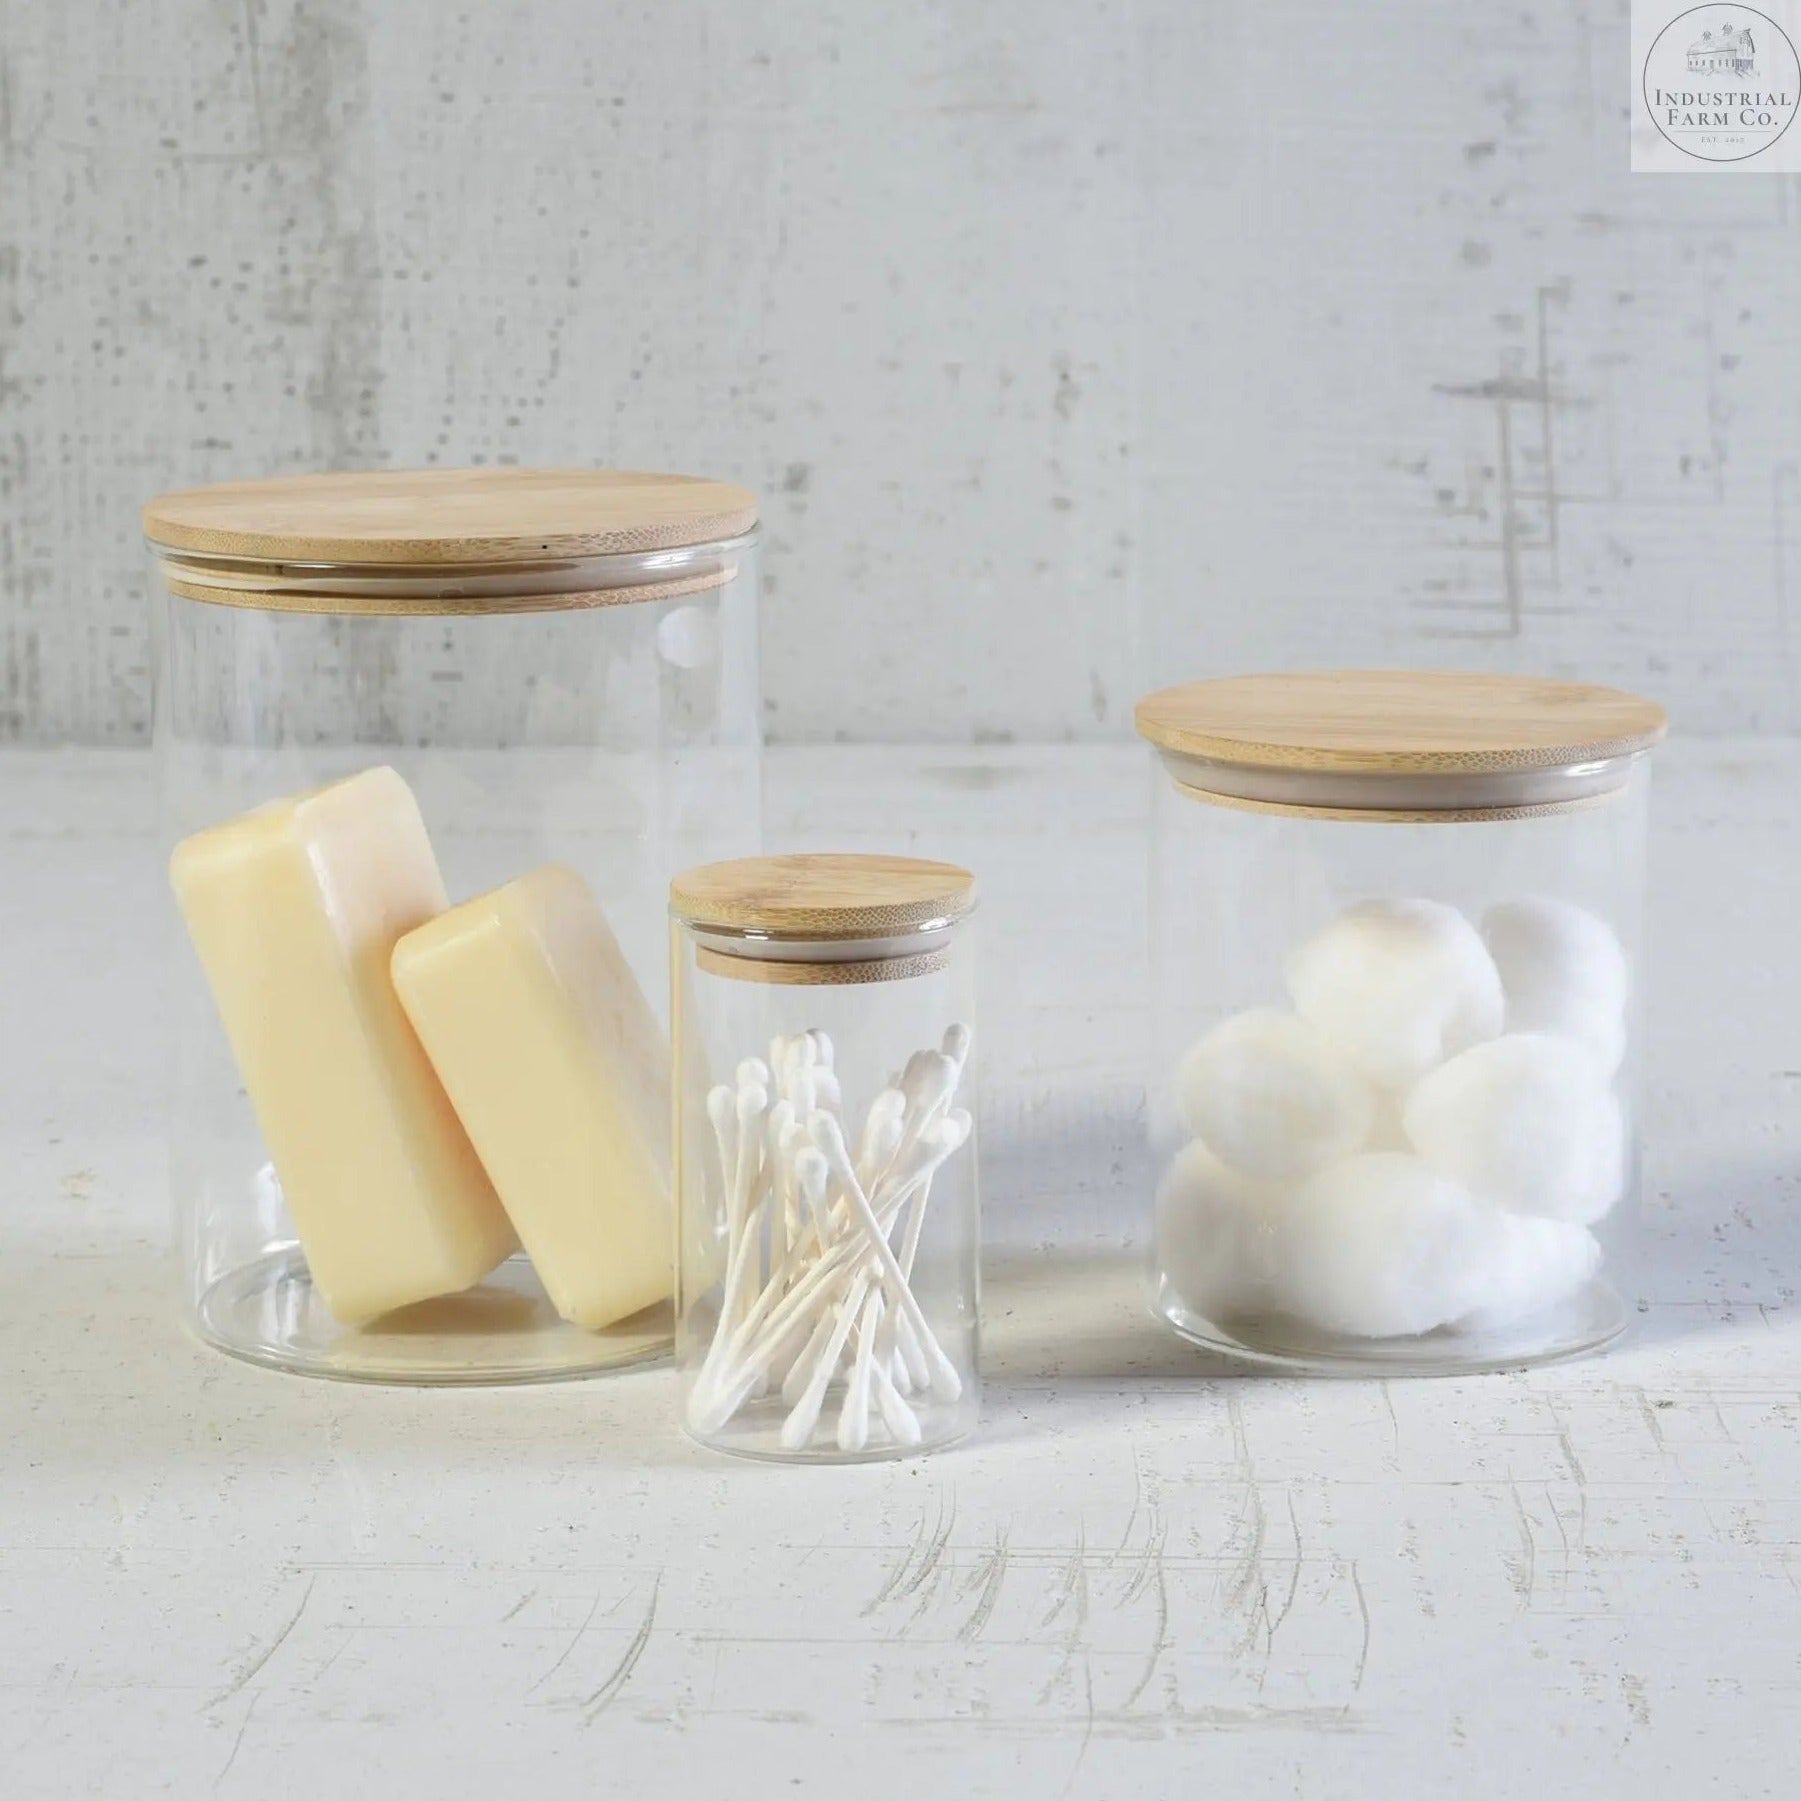 Glass Canister with Wood Lid  SMALL   | Industrial Farm Co